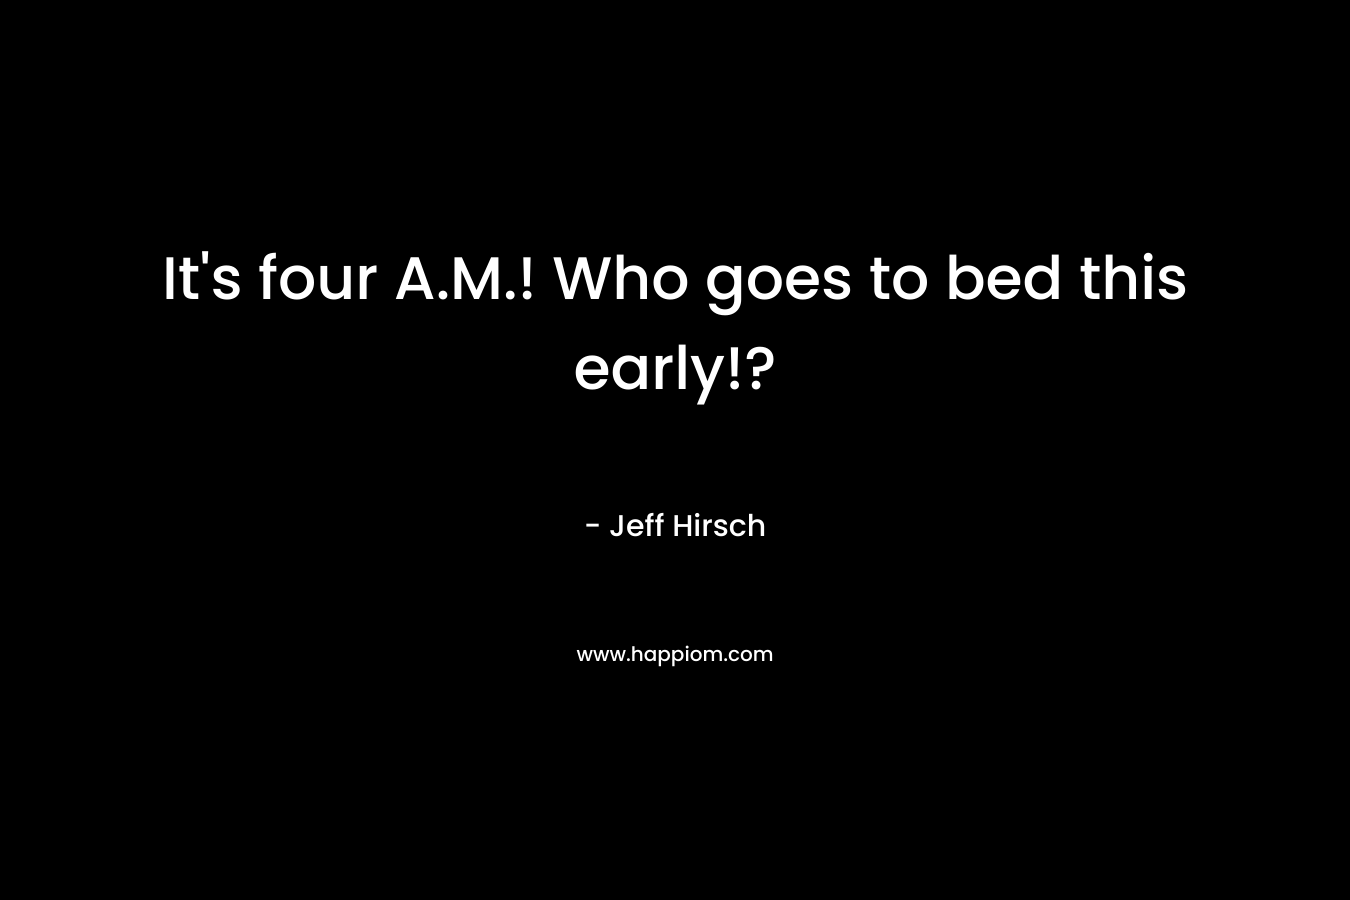 It’s four A.M.! Who goes to bed this early!? – Jeff Hirsch